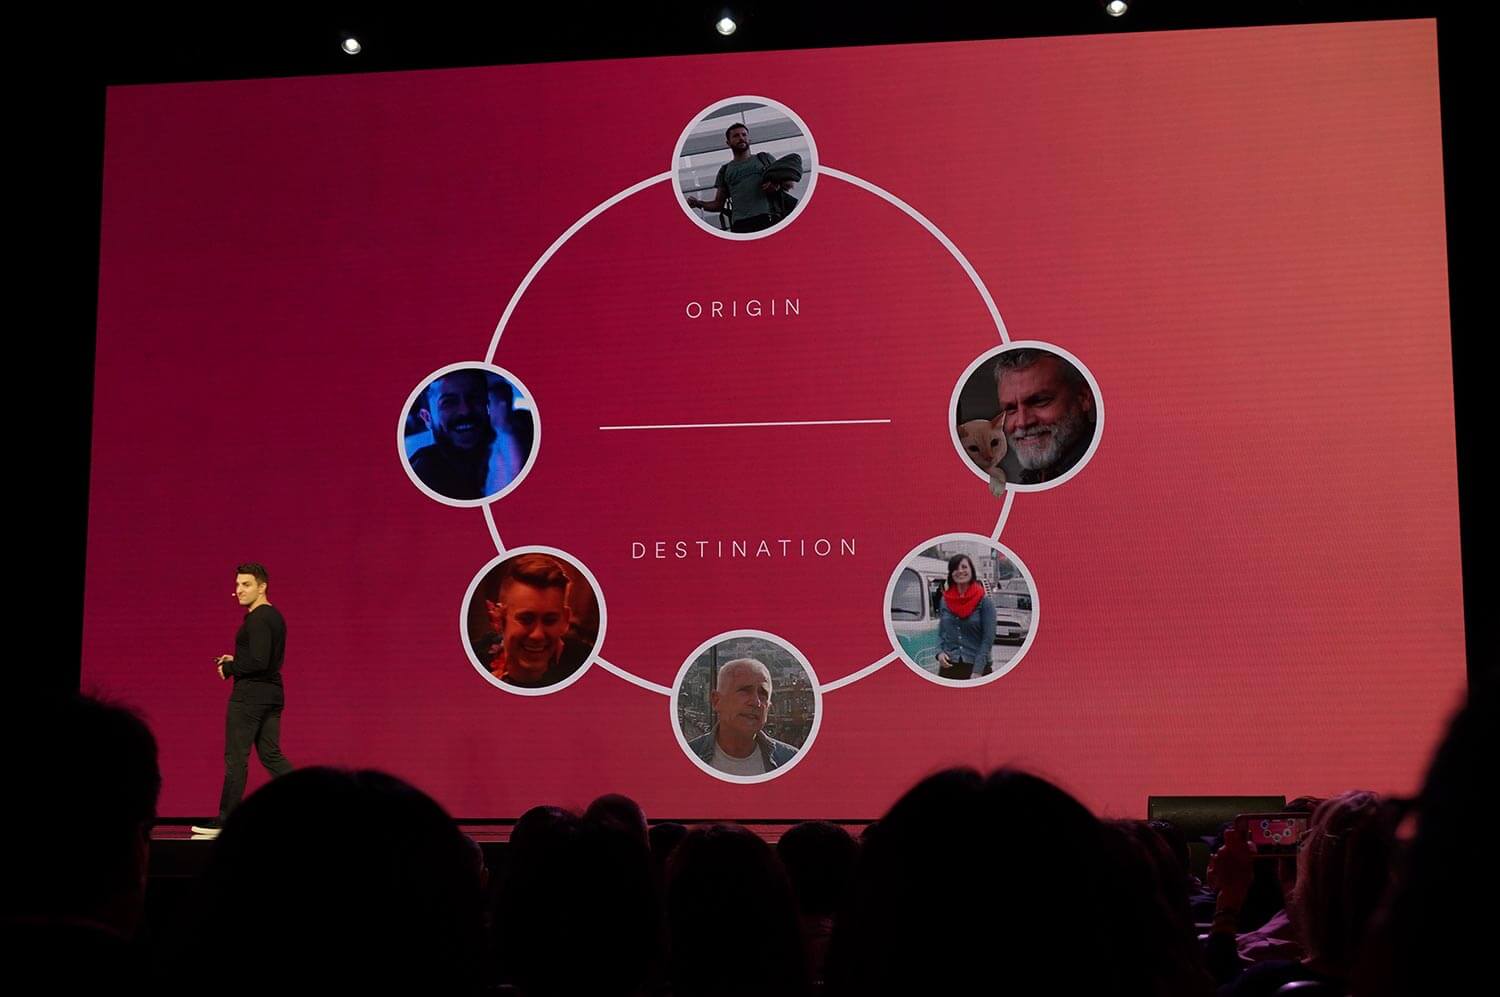 Airbnb chief executive Brian Chesky explains the company's vision.